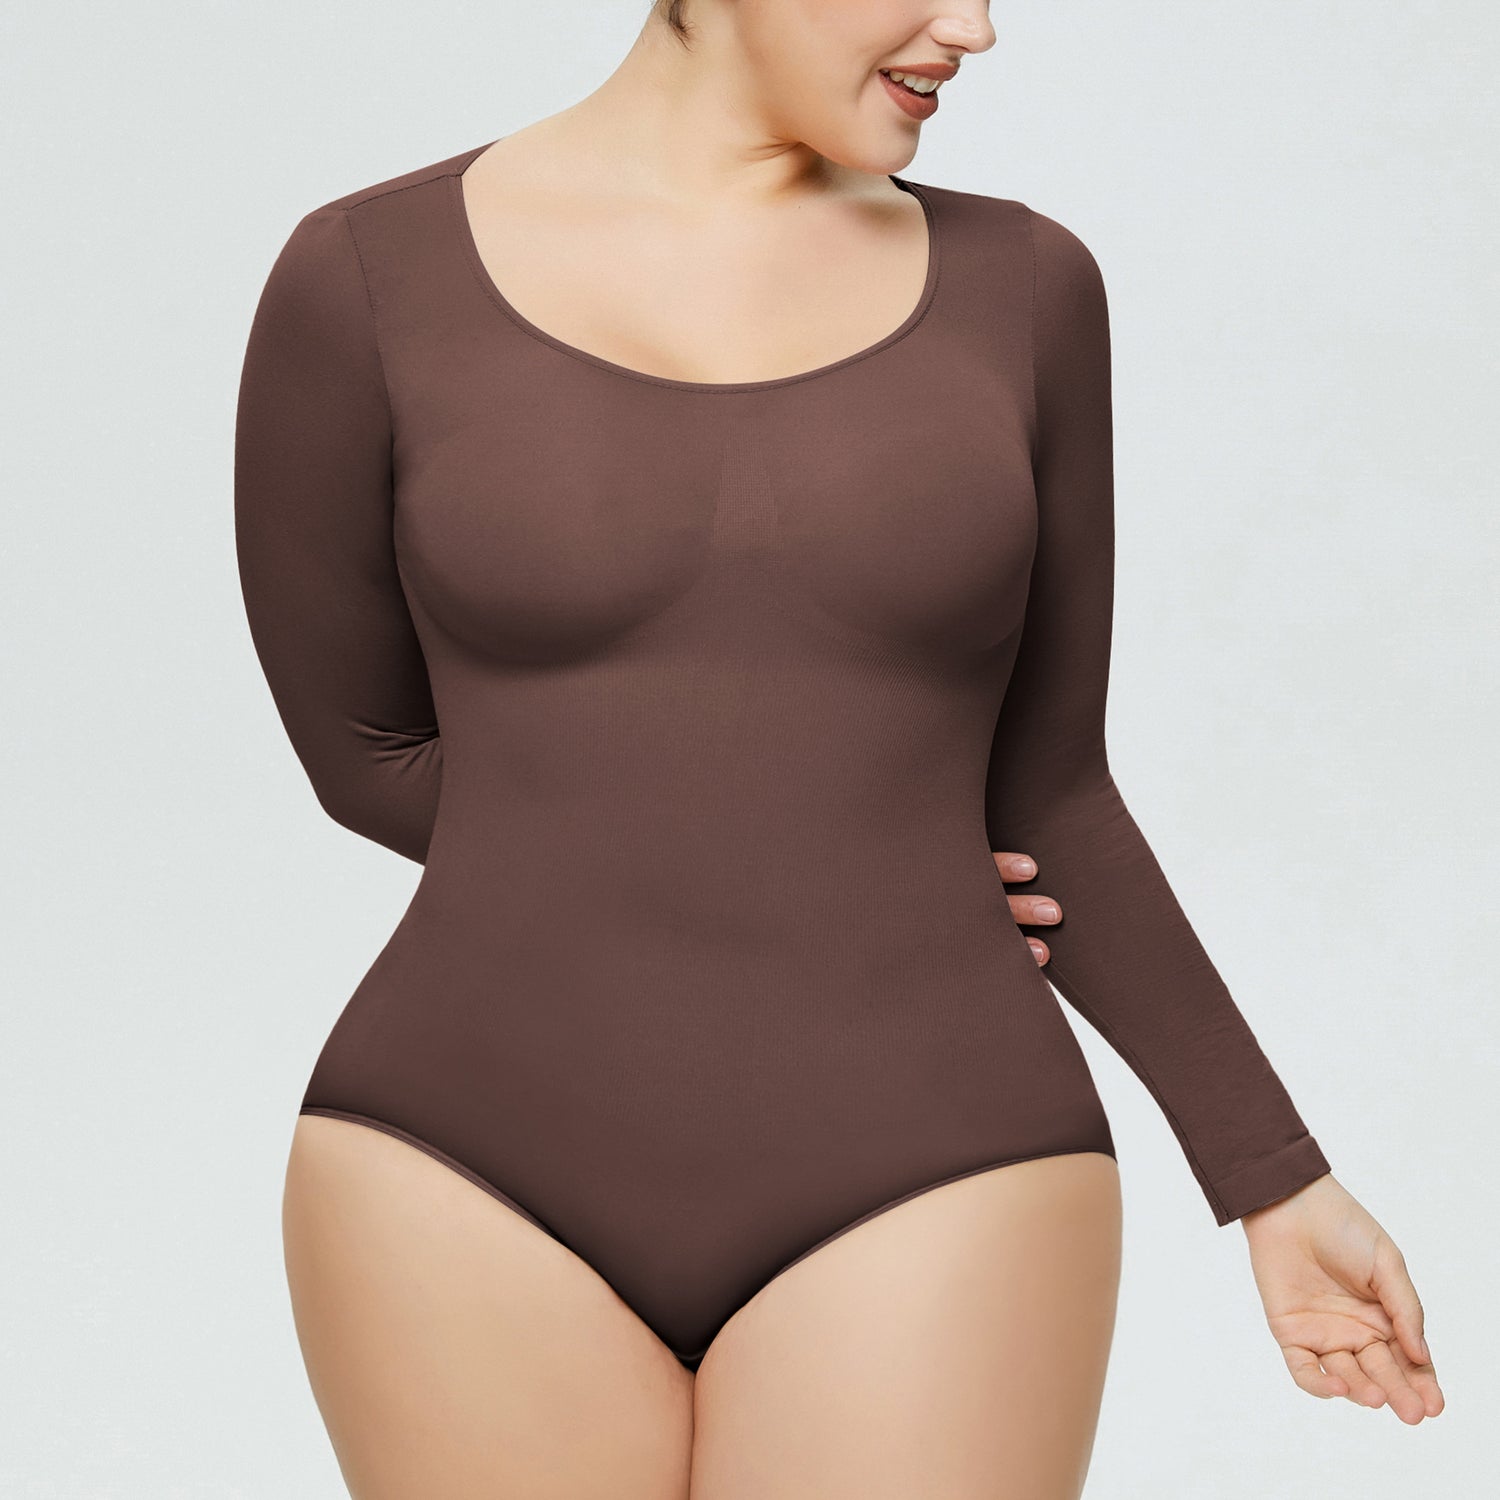 Lingerie  | Women's Long-Sleeved Corset Body Shaper Bodysuit – One-Piece Bottoming Shirt | Brown |  2XL| thecurvestory.myshopify.com